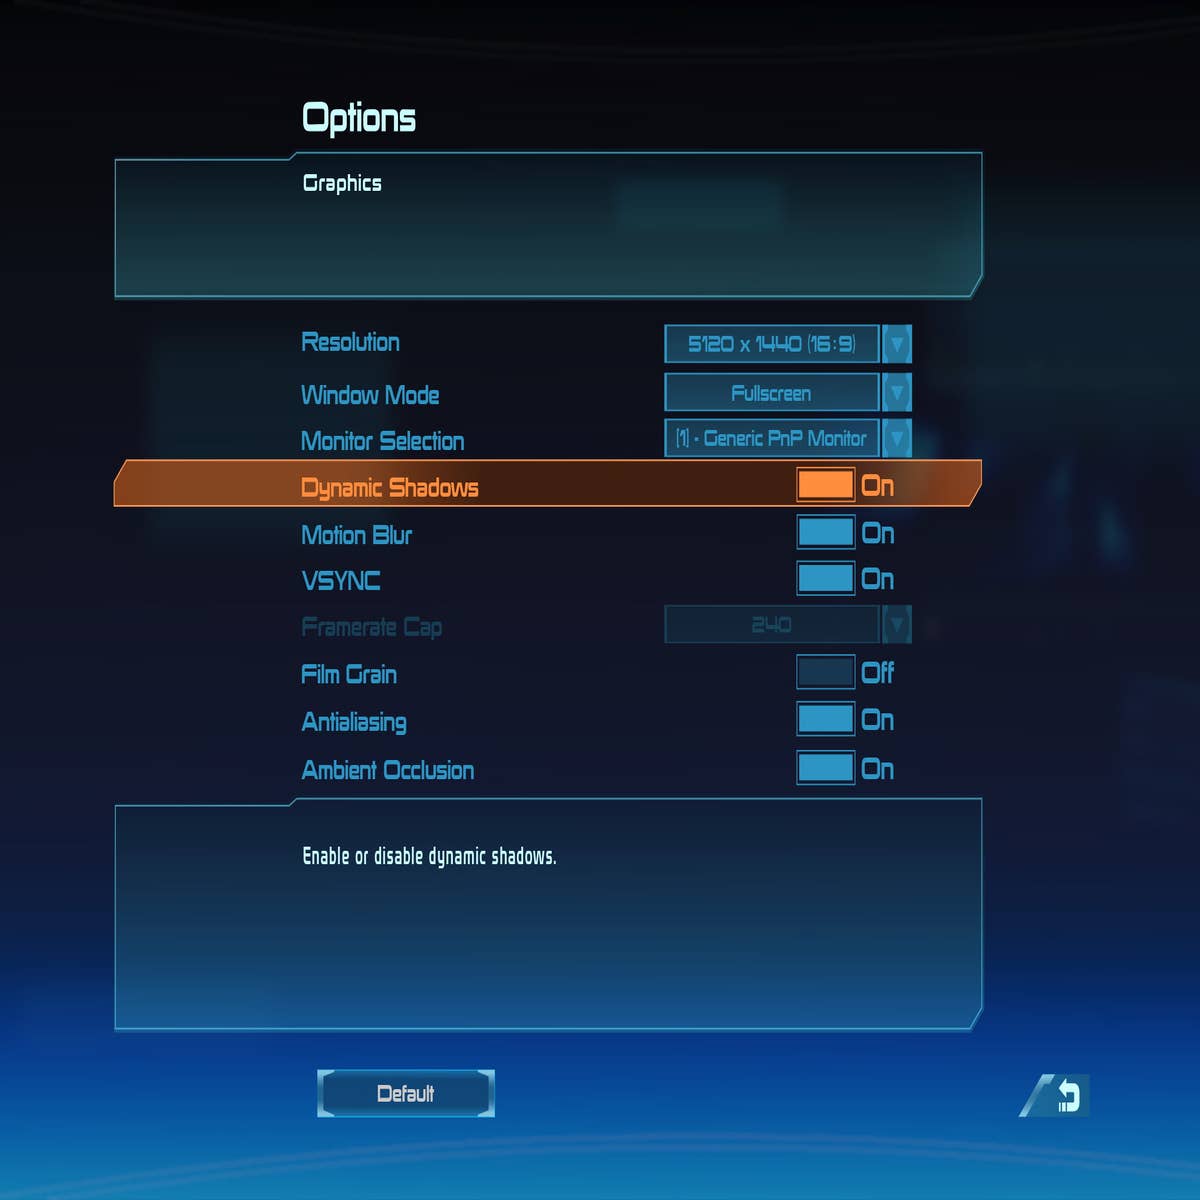 PS4 Equivalent PC Settings 